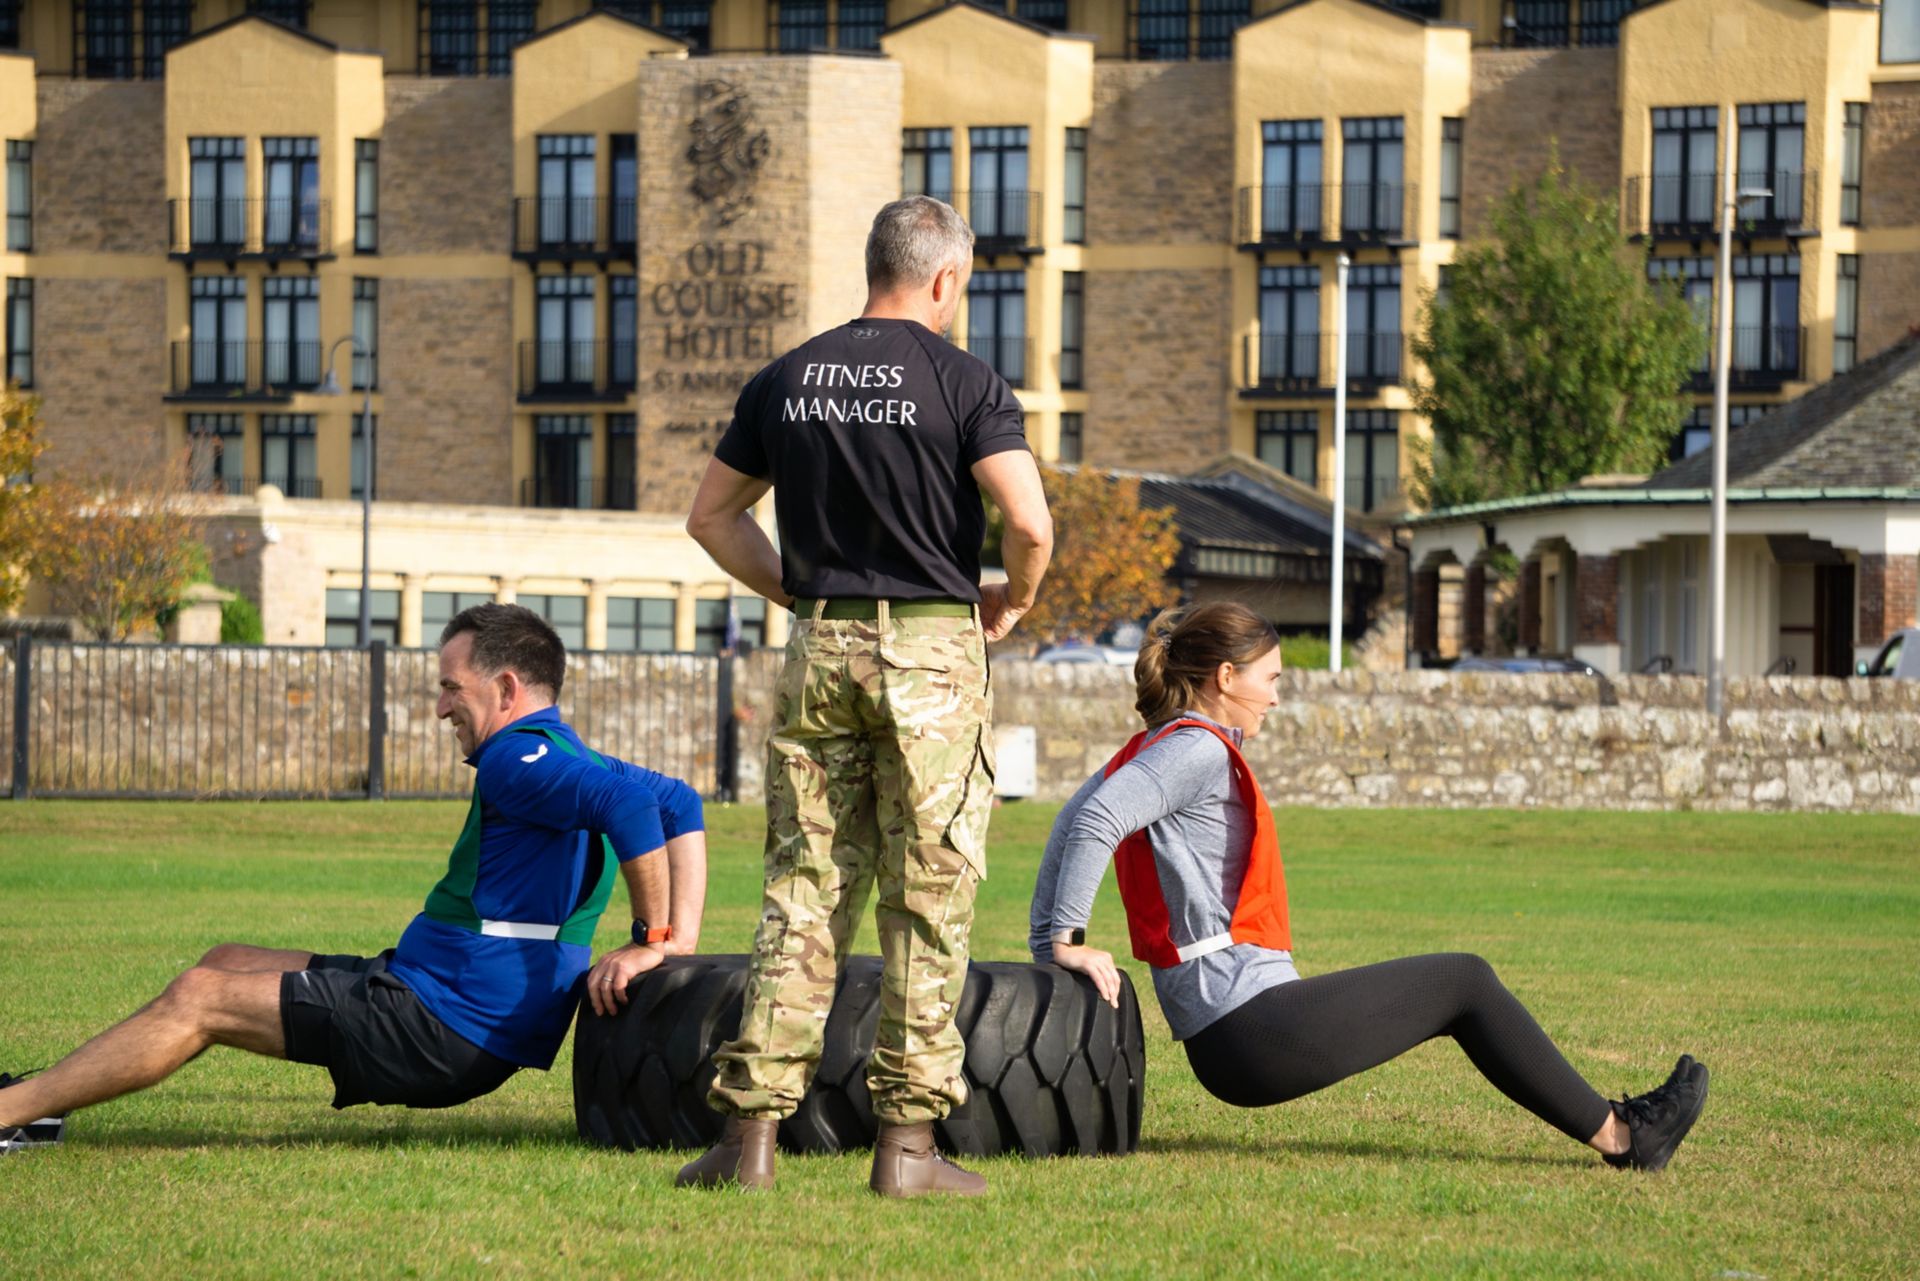 Kohler Military Fit Classes at the Old Course Hotel, St Andrews